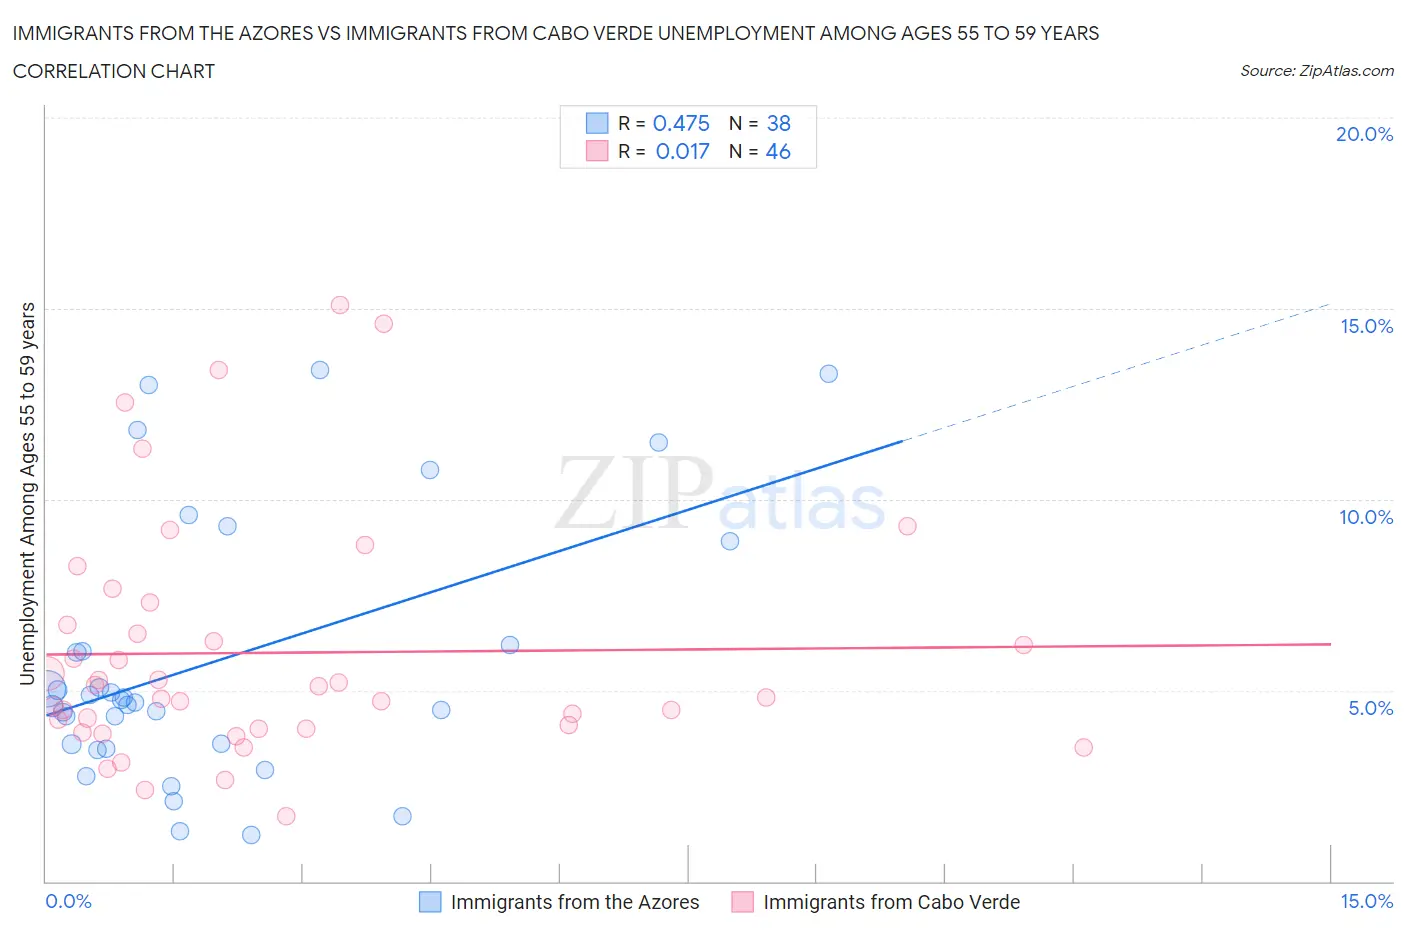 Immigrants from the Azores vs Immigrants from Cabo Verde Unemployment Among Ages 55 to 59 years